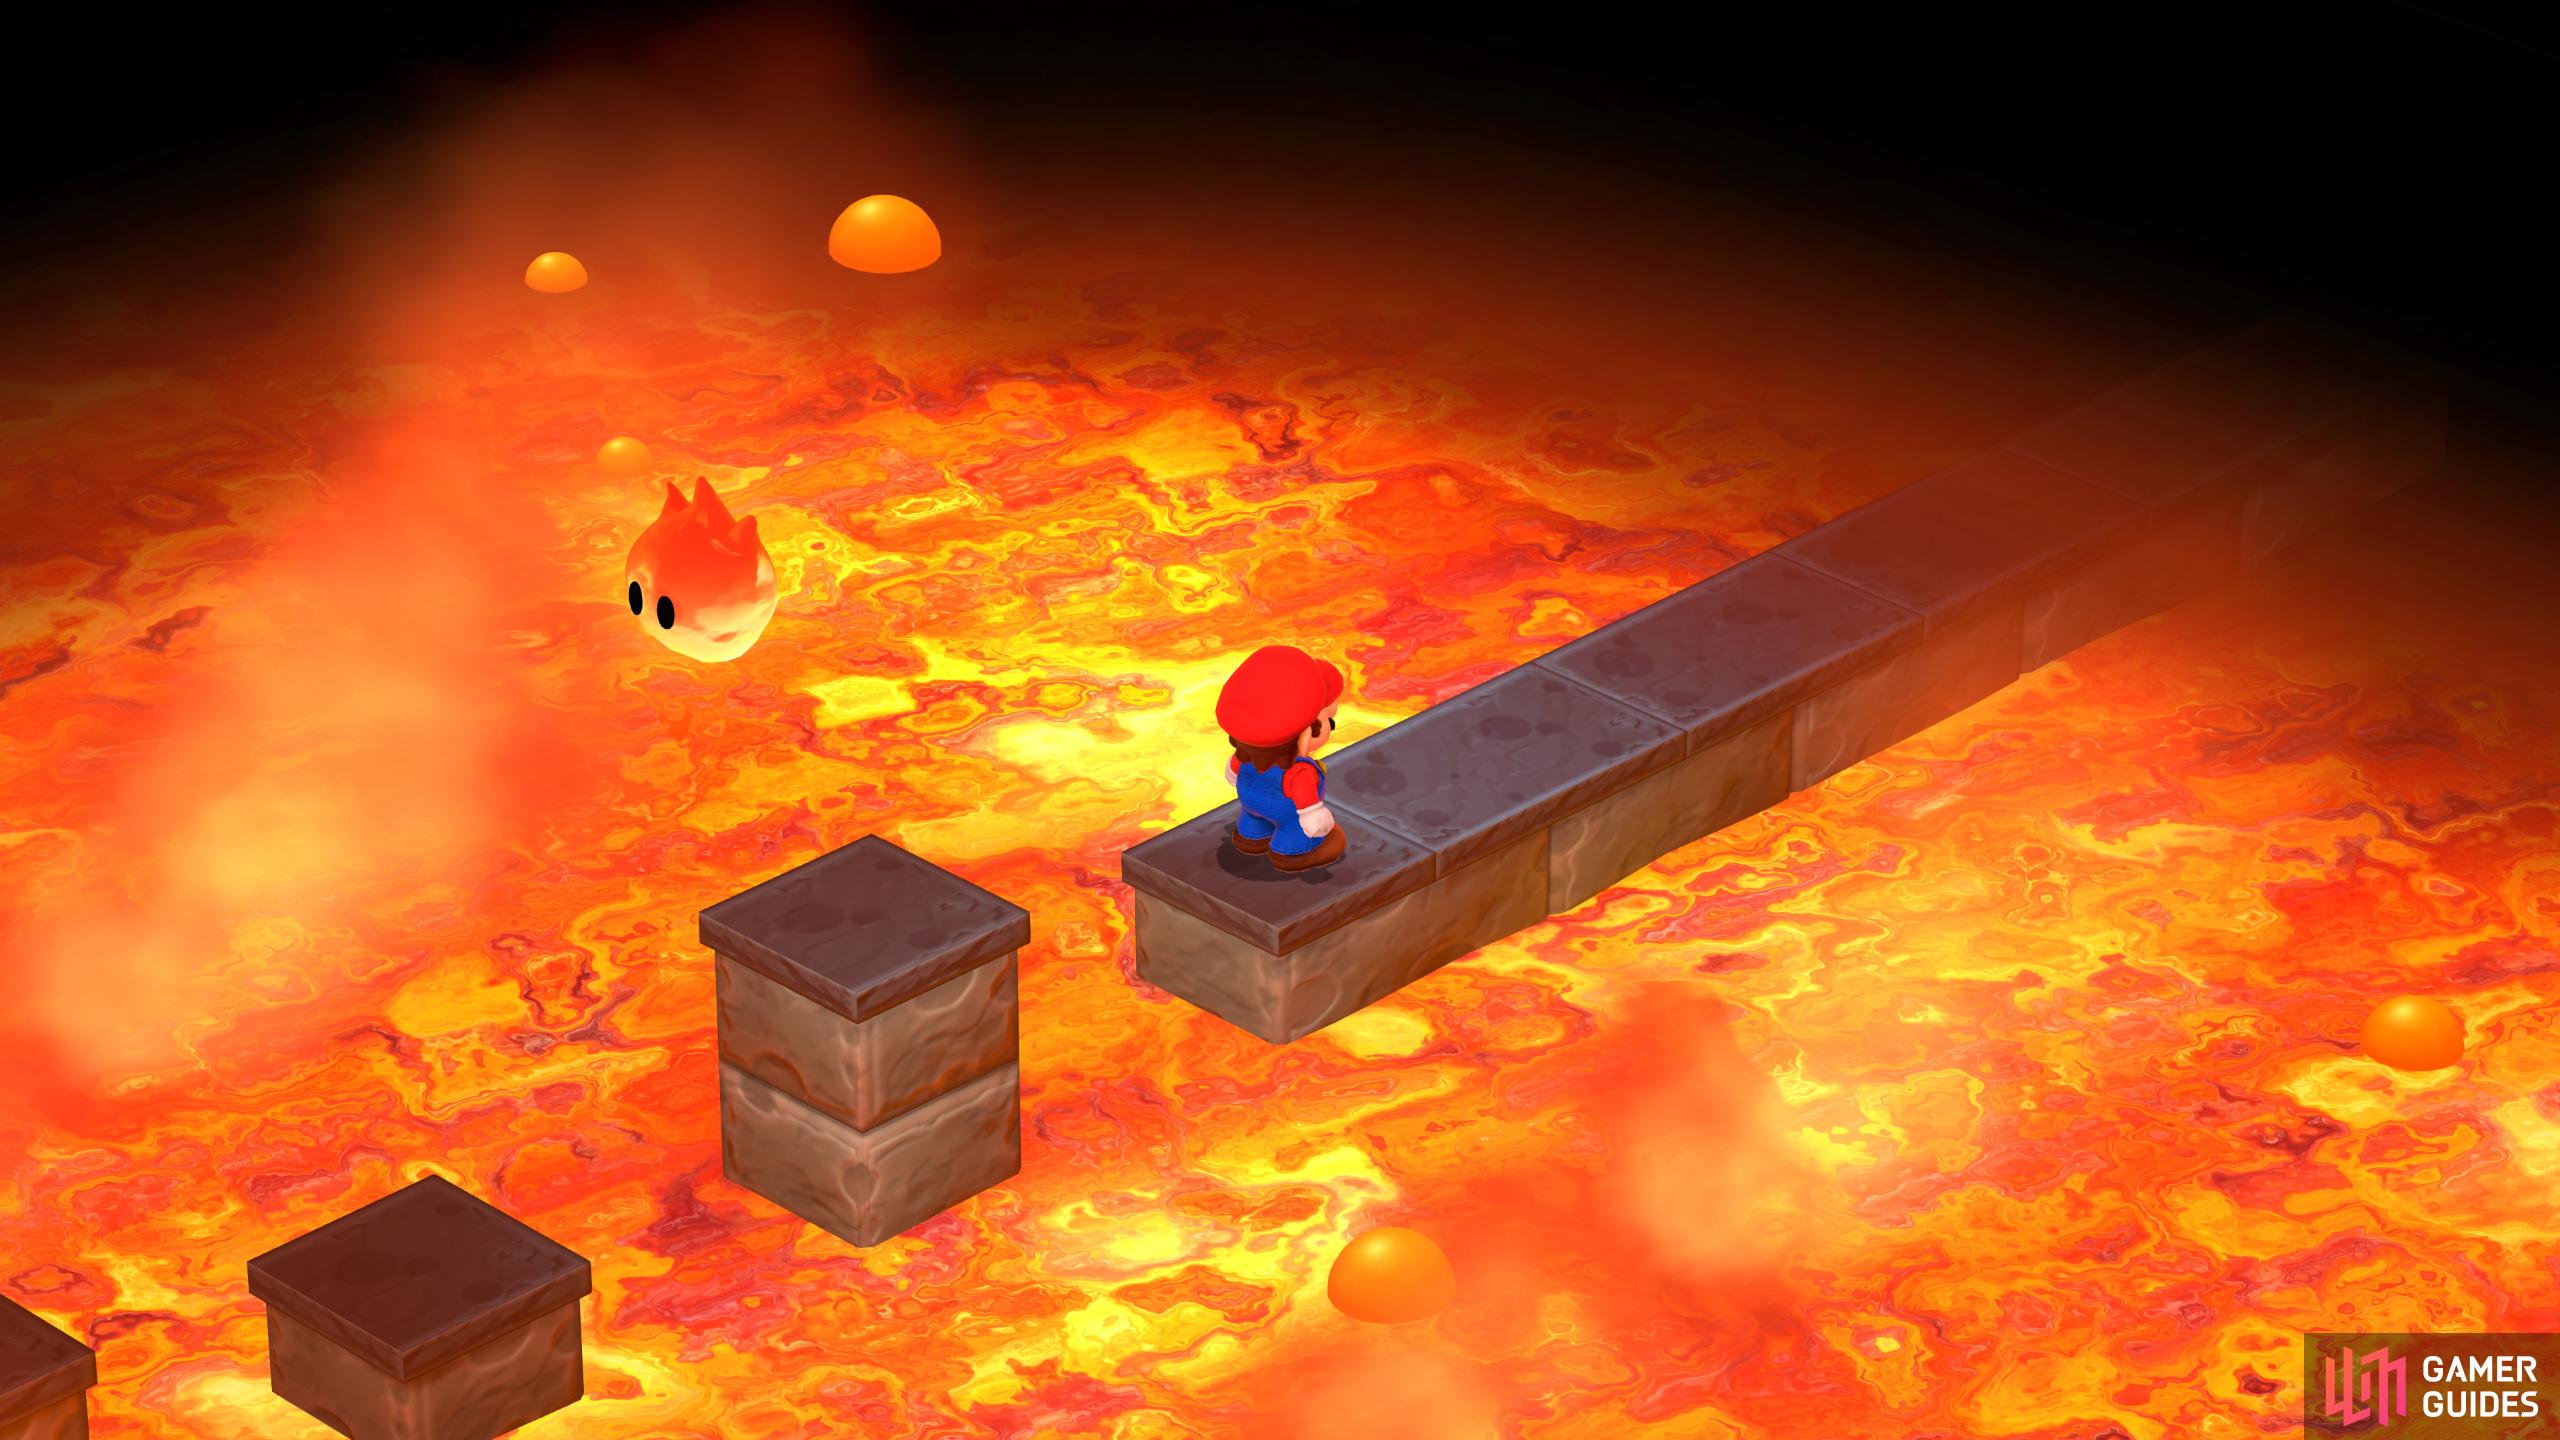 Jump across the gaps in the lava-filled room and exit the other side.